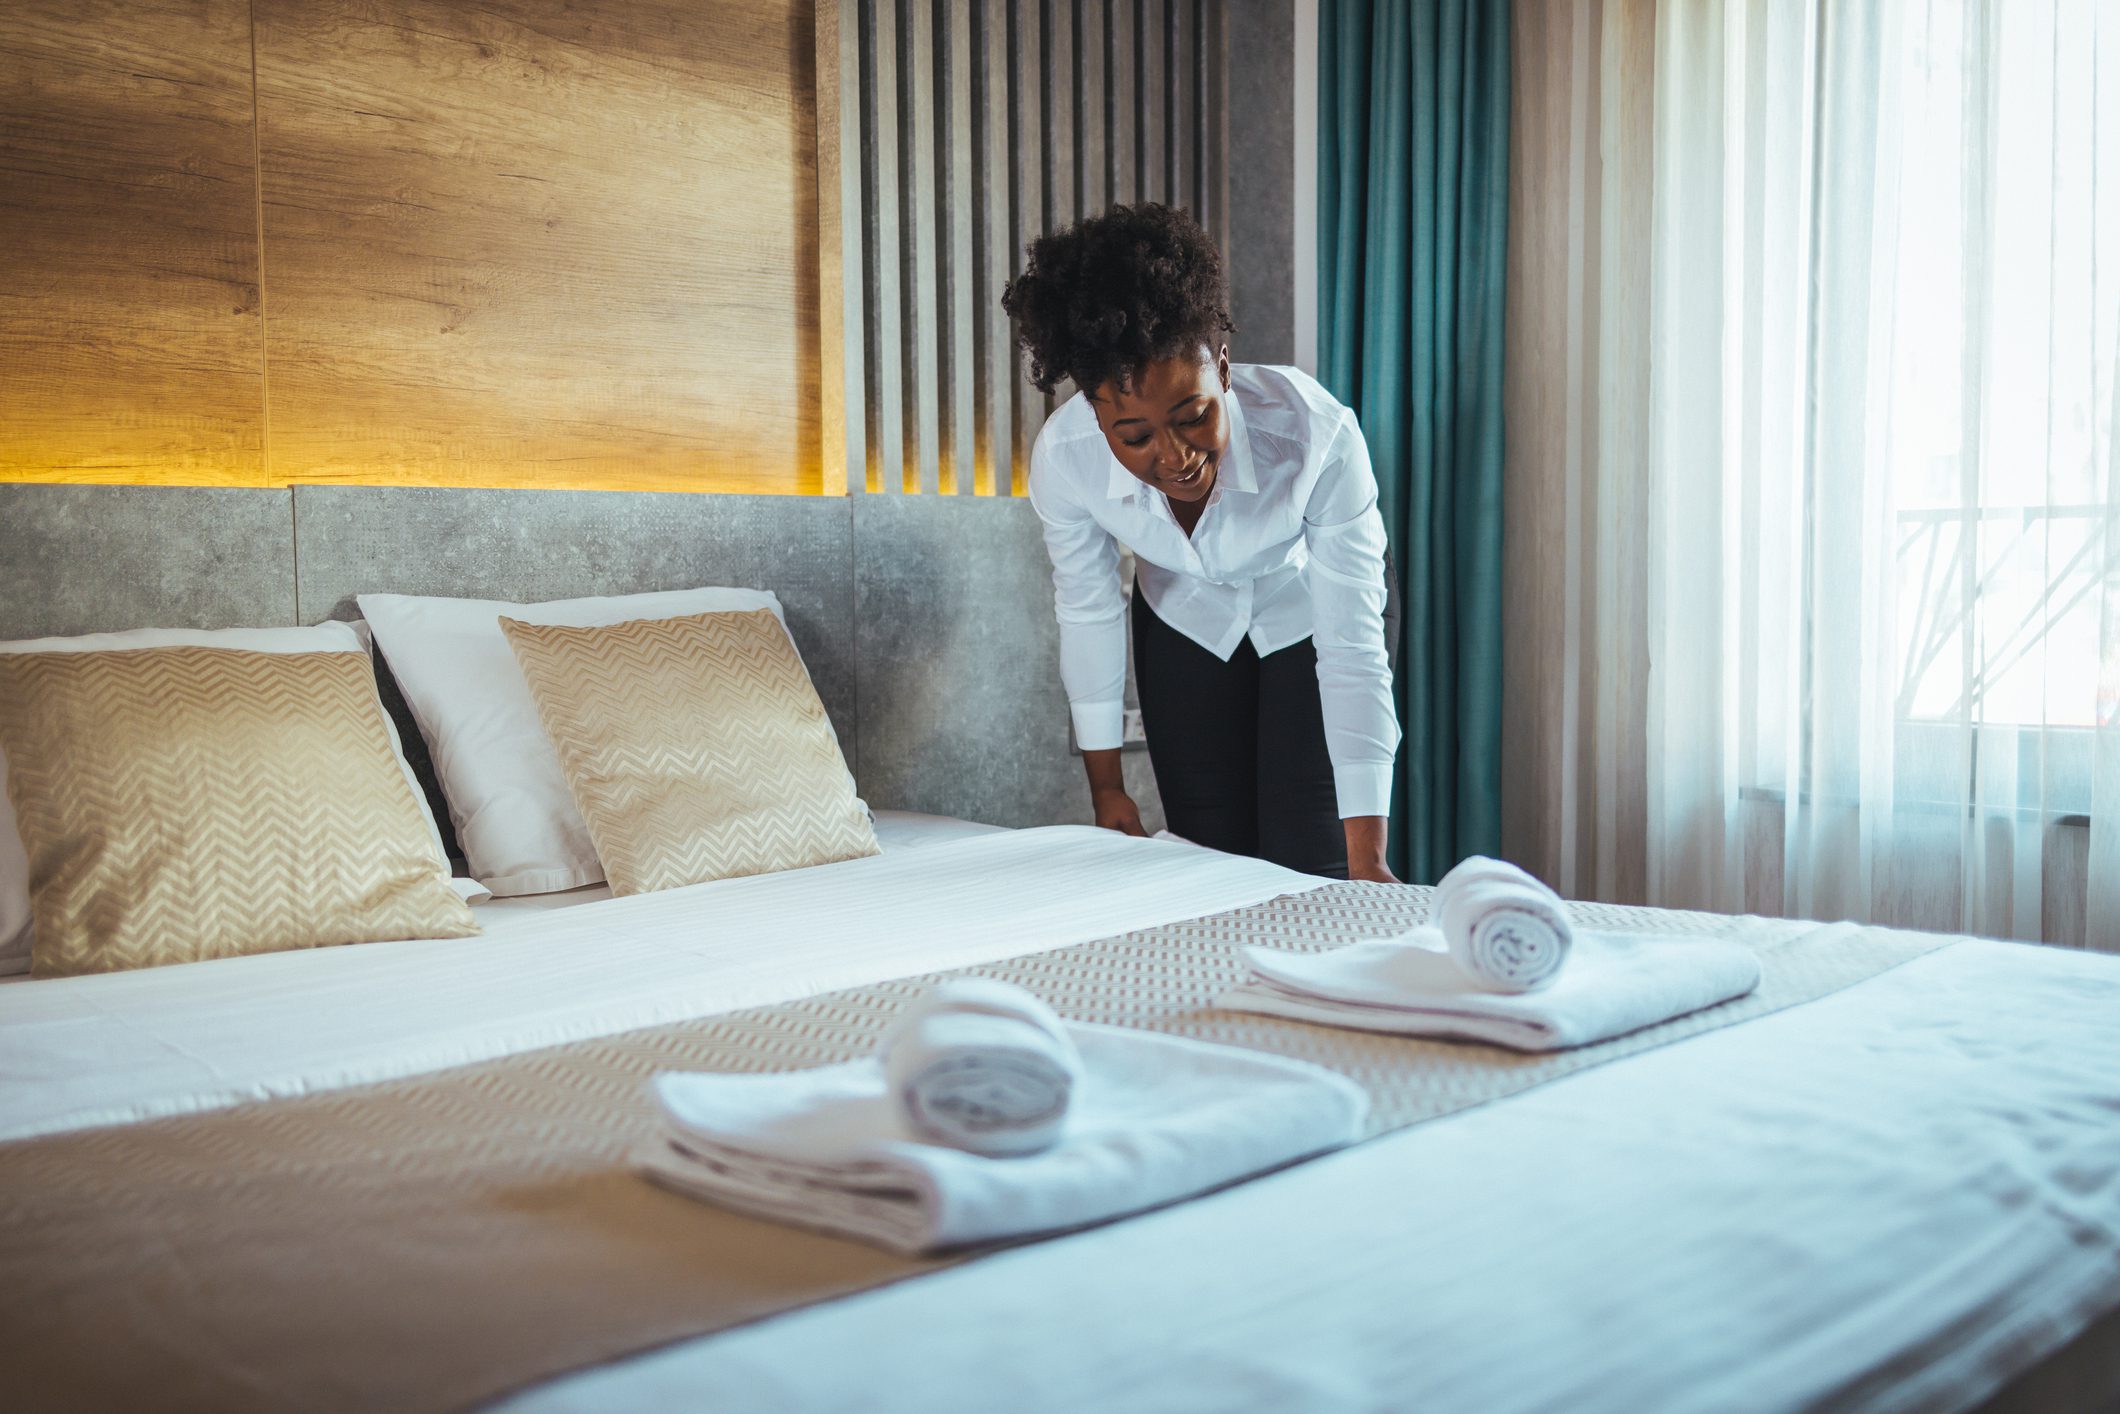 A woman making a bed in a hotel room